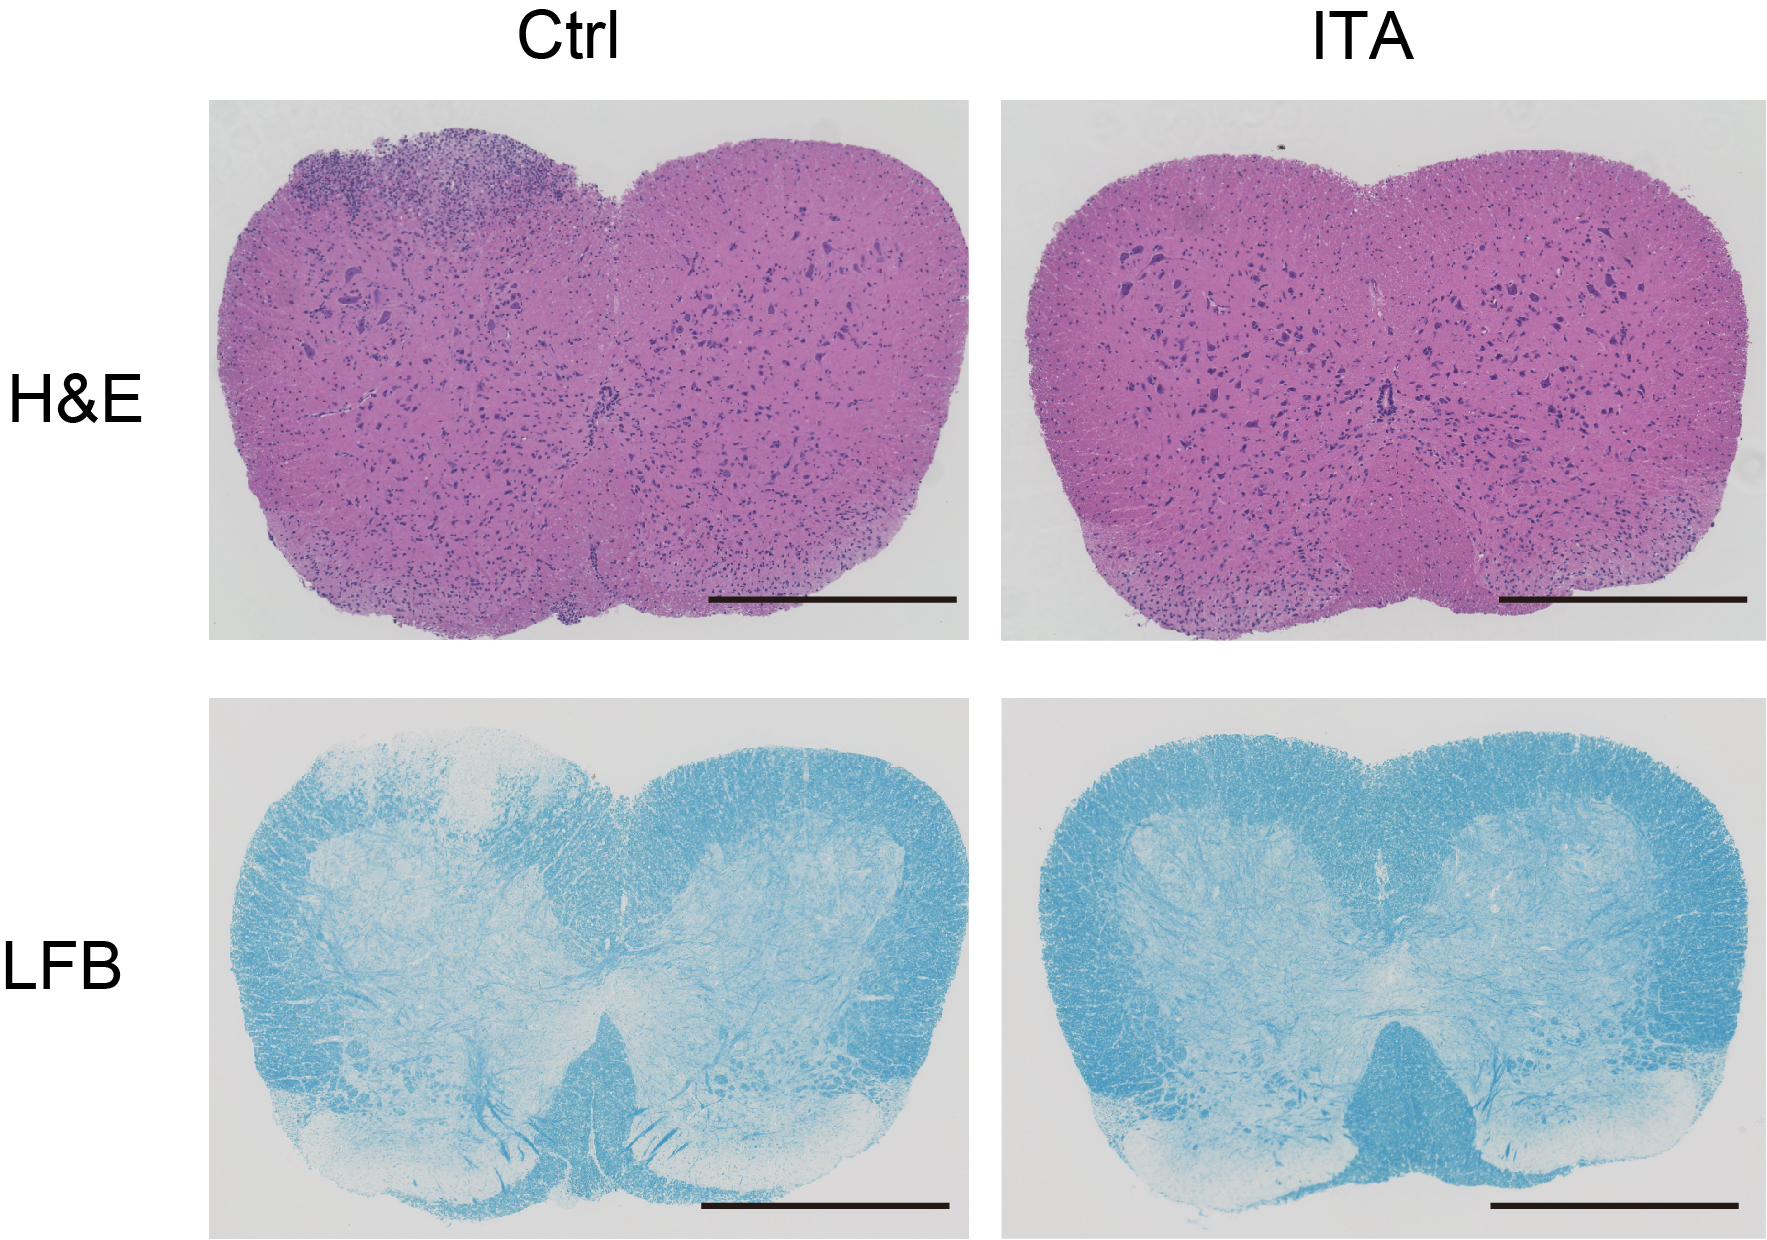 In mice models with adoptive transfer experimental autoimmune encephalomyelitis, treatment with itaconate (right) greatly ameliorates the effects of the disease, compared to untreated mice.